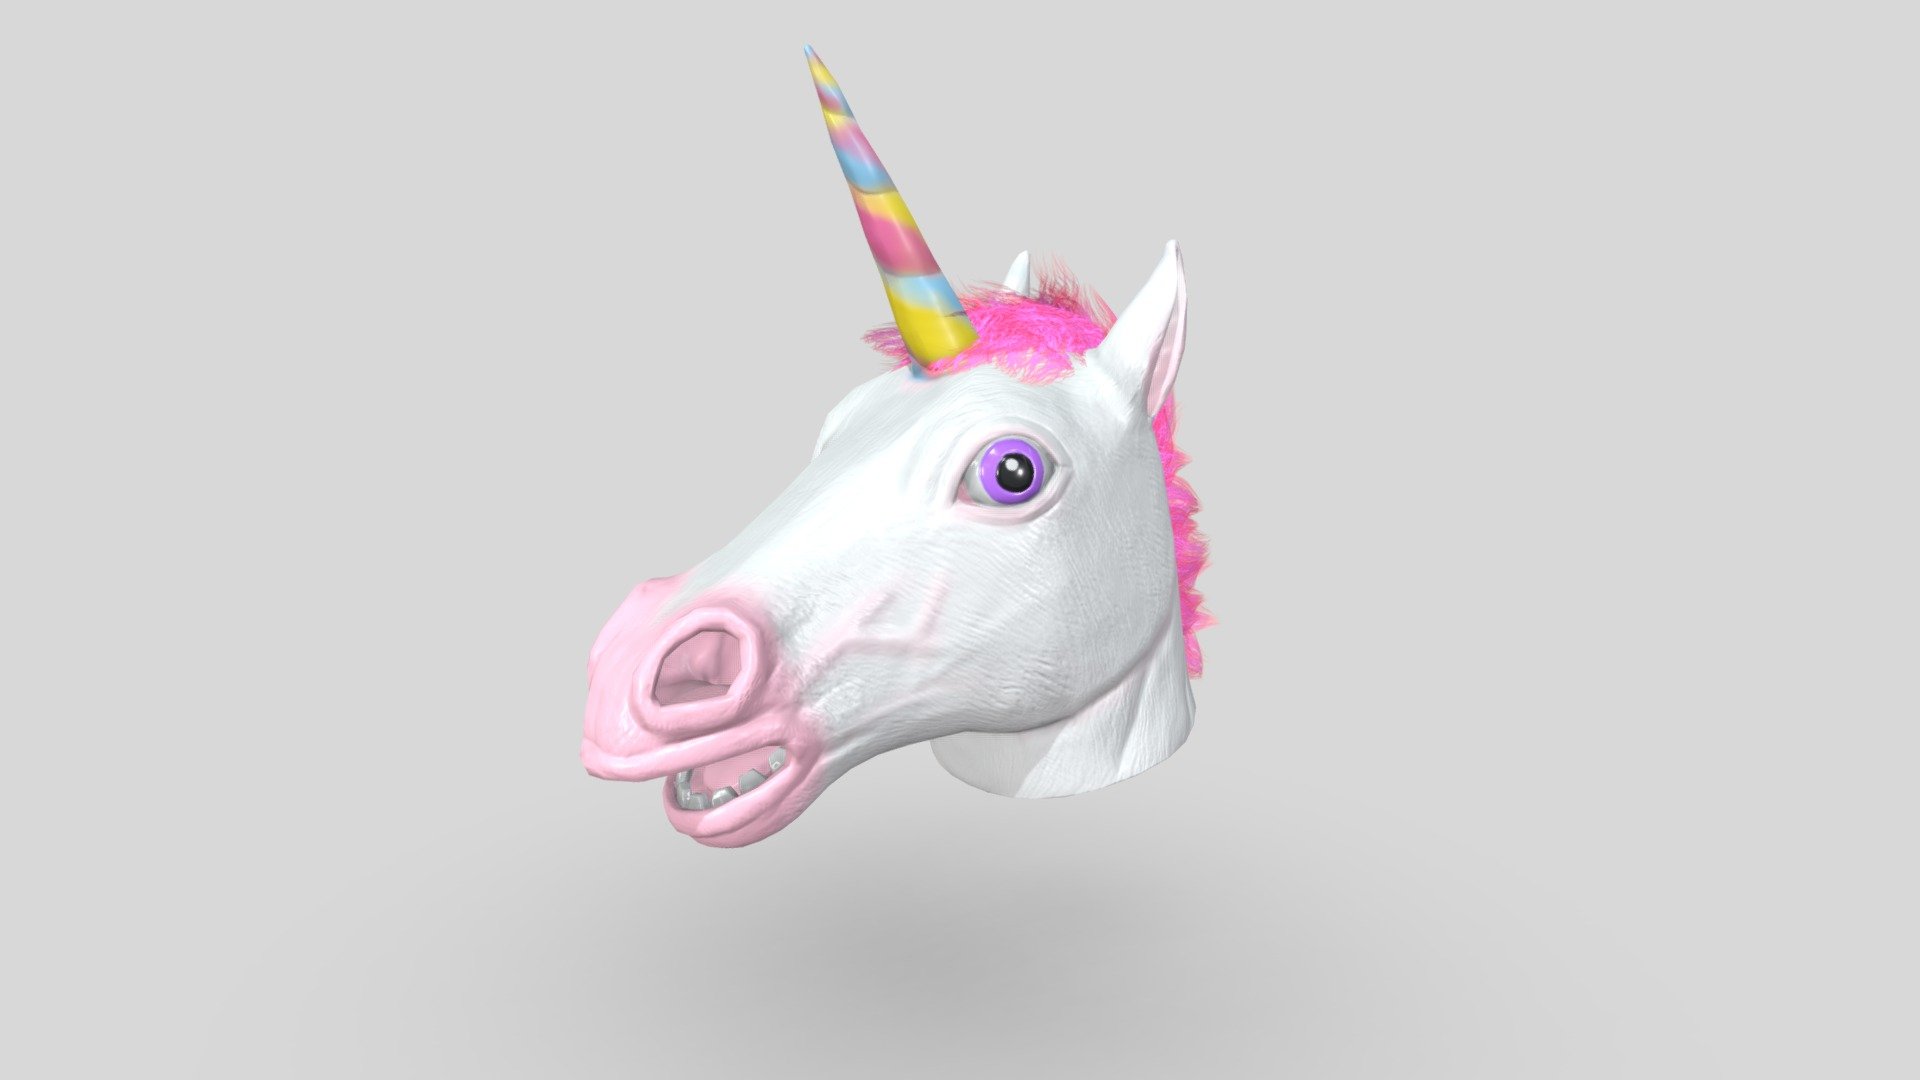 If you need additional work done do not hesitate to contact me, I am available for freelance work.

Funny Rubber Horse Head Mask in rainbow unicorn attire for a character in disguise. 

Highpoly sculpted in Nomadsculpt. Lowpoly made in Blender. Model and Concept by Me, Enya Gerber 3d model